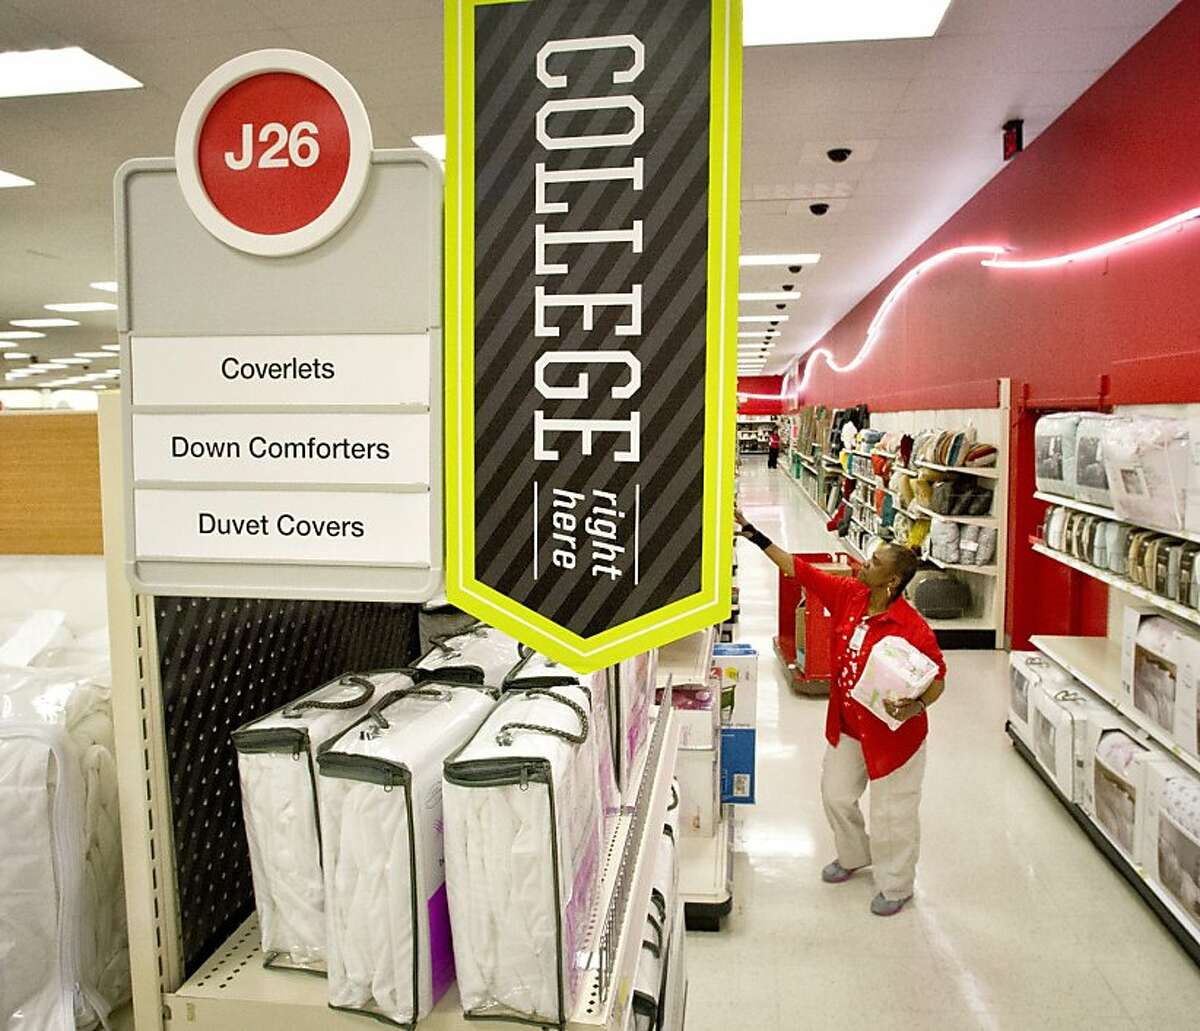 College-oriented merchandise line the aisles at the Target store on Nicollet Mall in Minneapolis, Minnesota. (Glen Stubbe/Minneapolis Star Tribune/MCT)